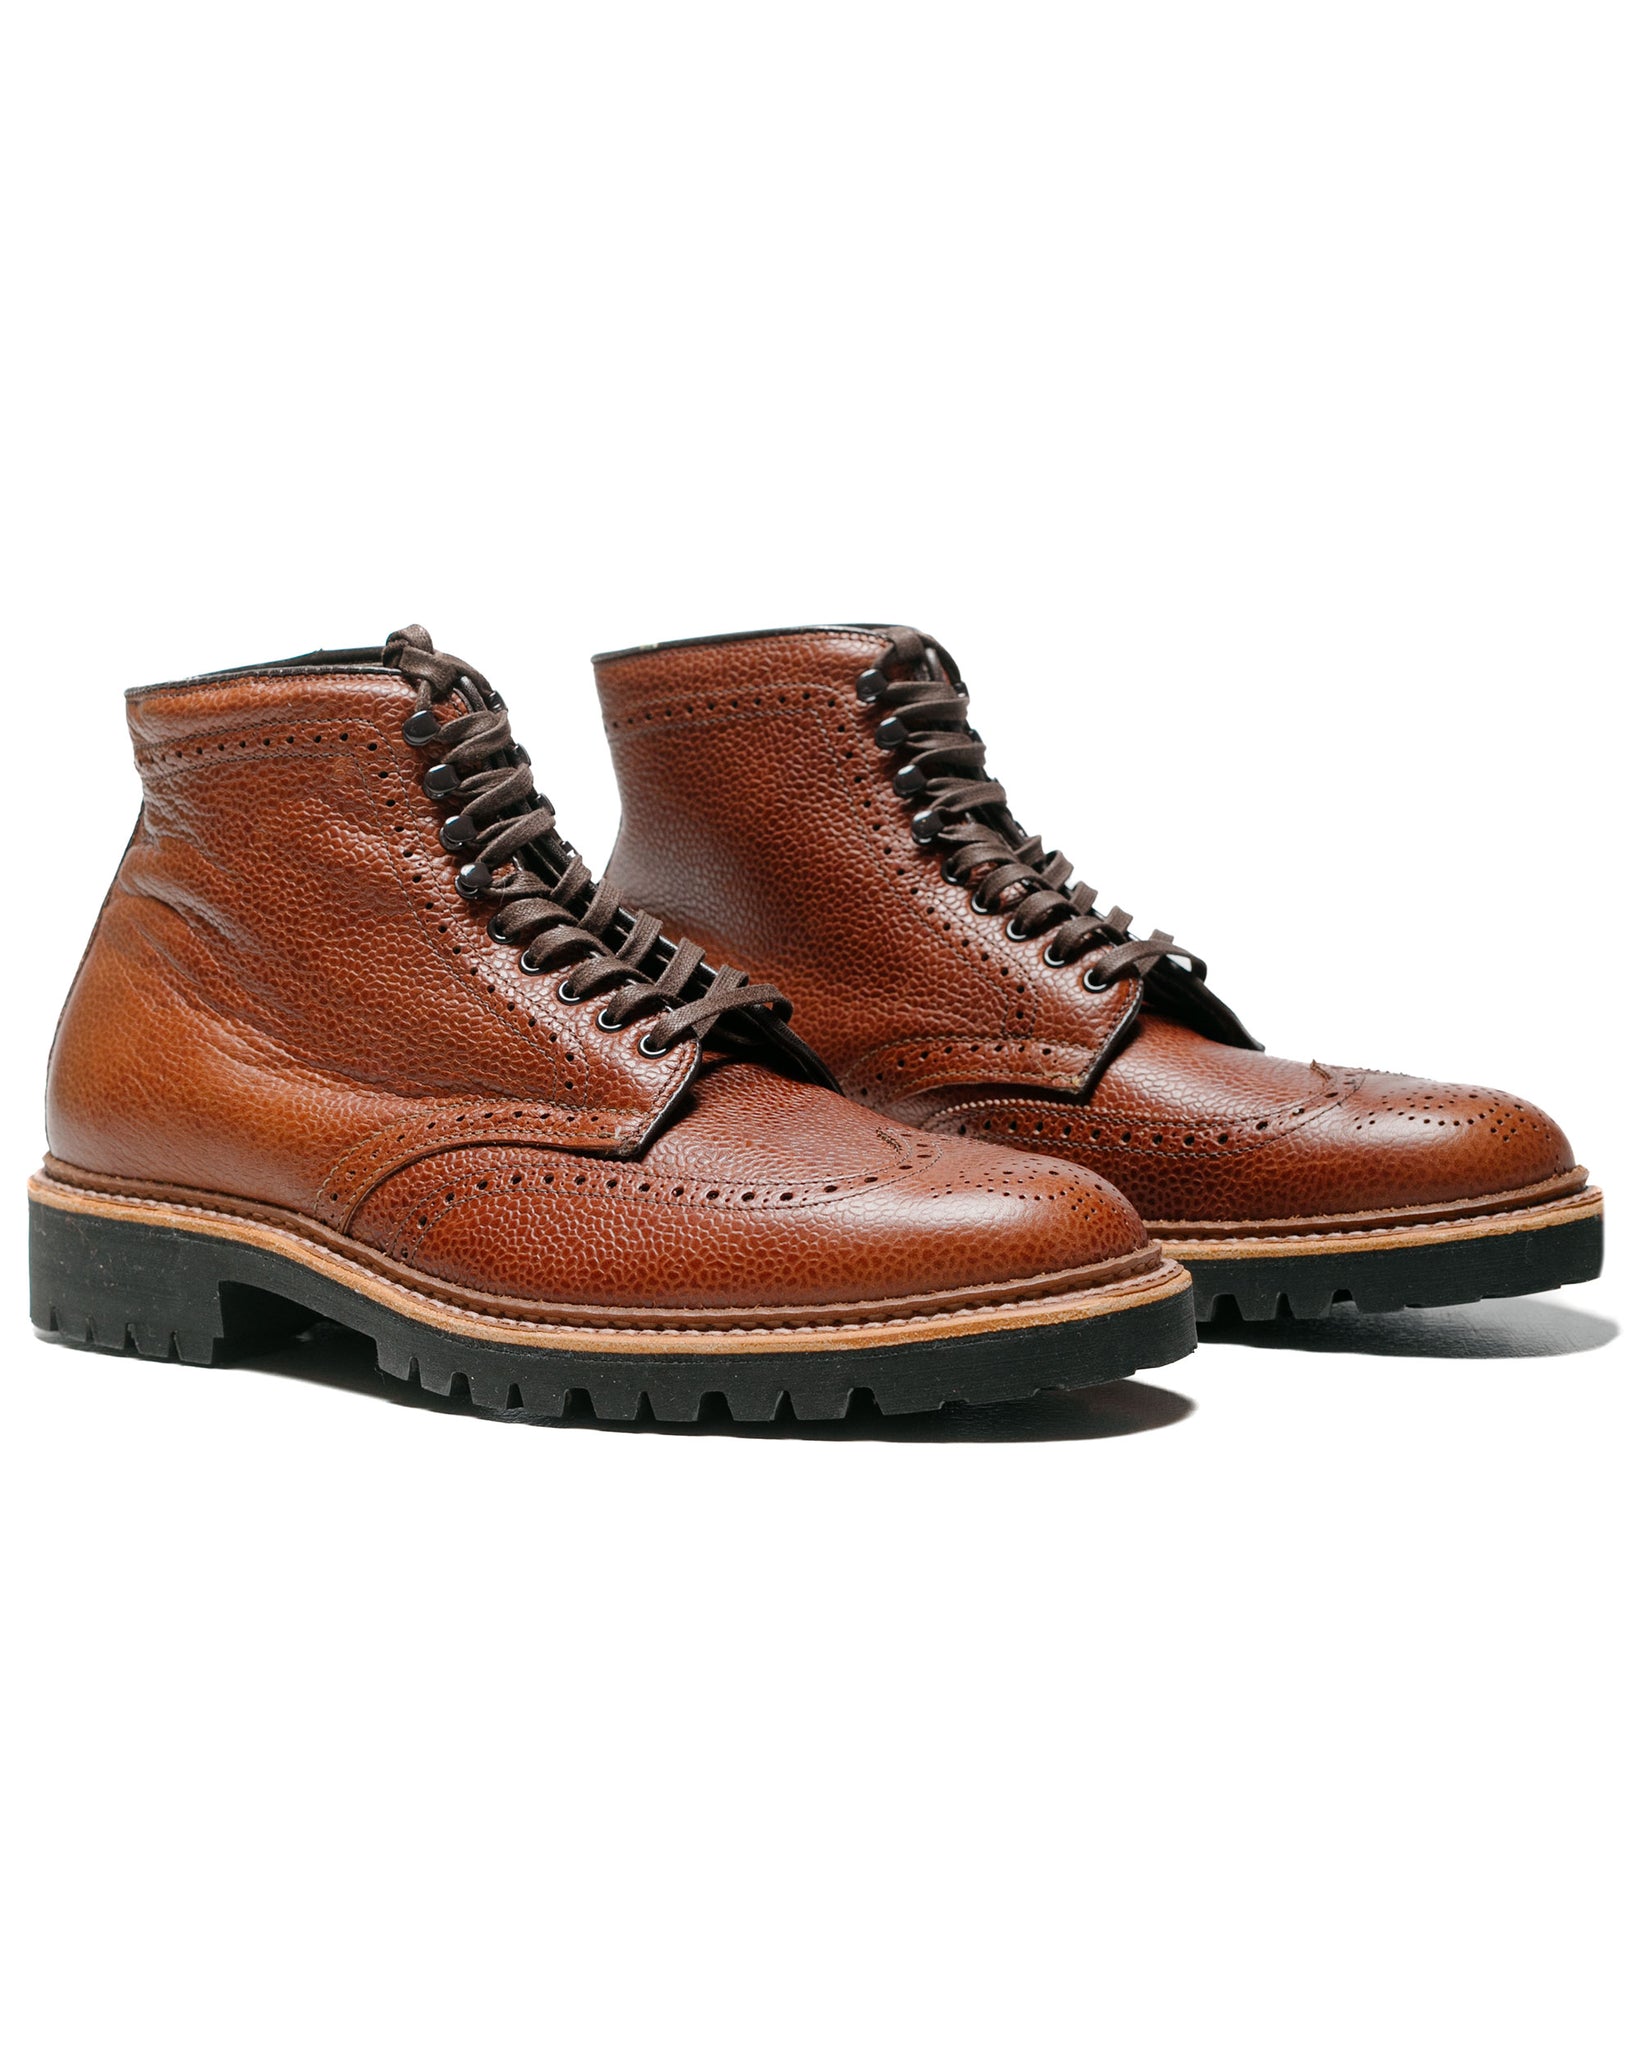 Alden Short Wing Boot Brown Scotch Grain With Lug Sole side